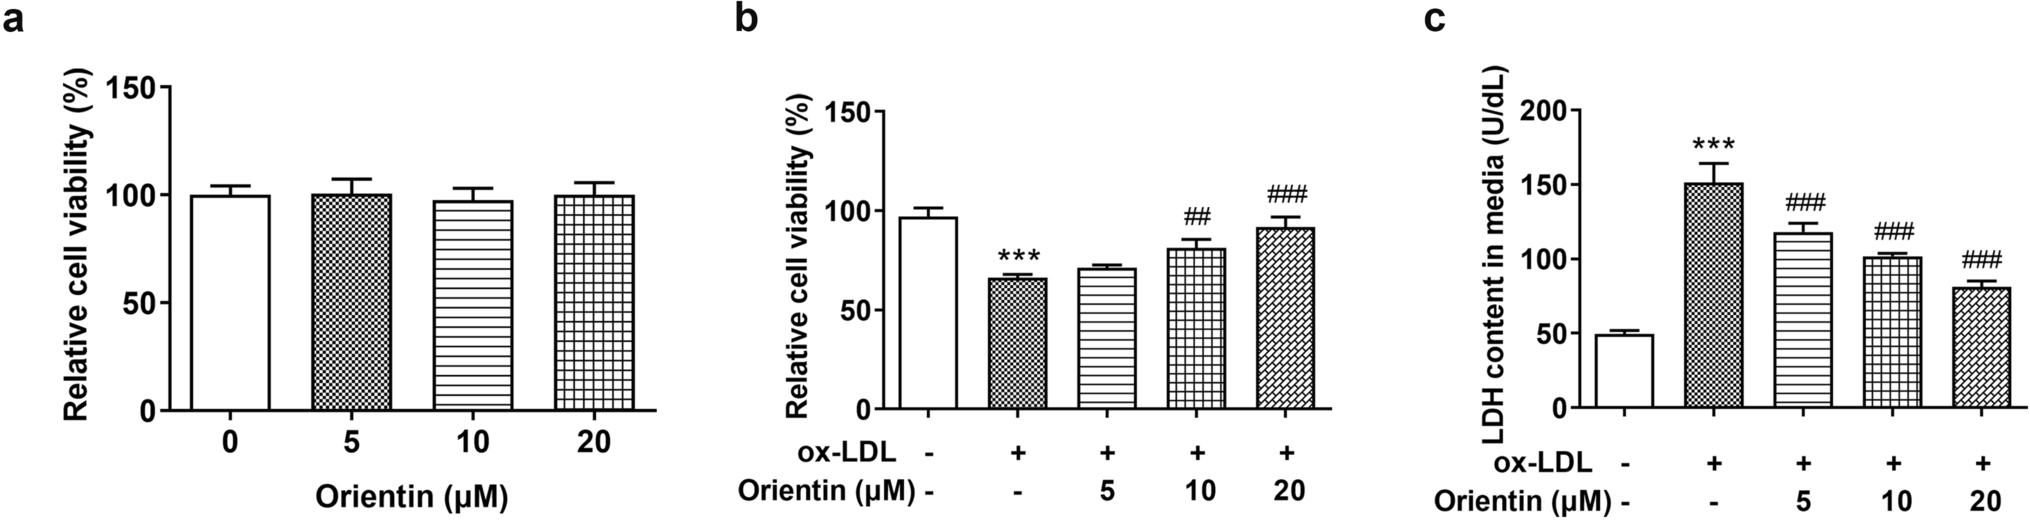 Orientin alleviates ox-LDL-induced oxidative stress, inflammation and apoptosis in human vascular endothelial cells by regulating Sestrin 1 (SESN1)-mediated autophagy